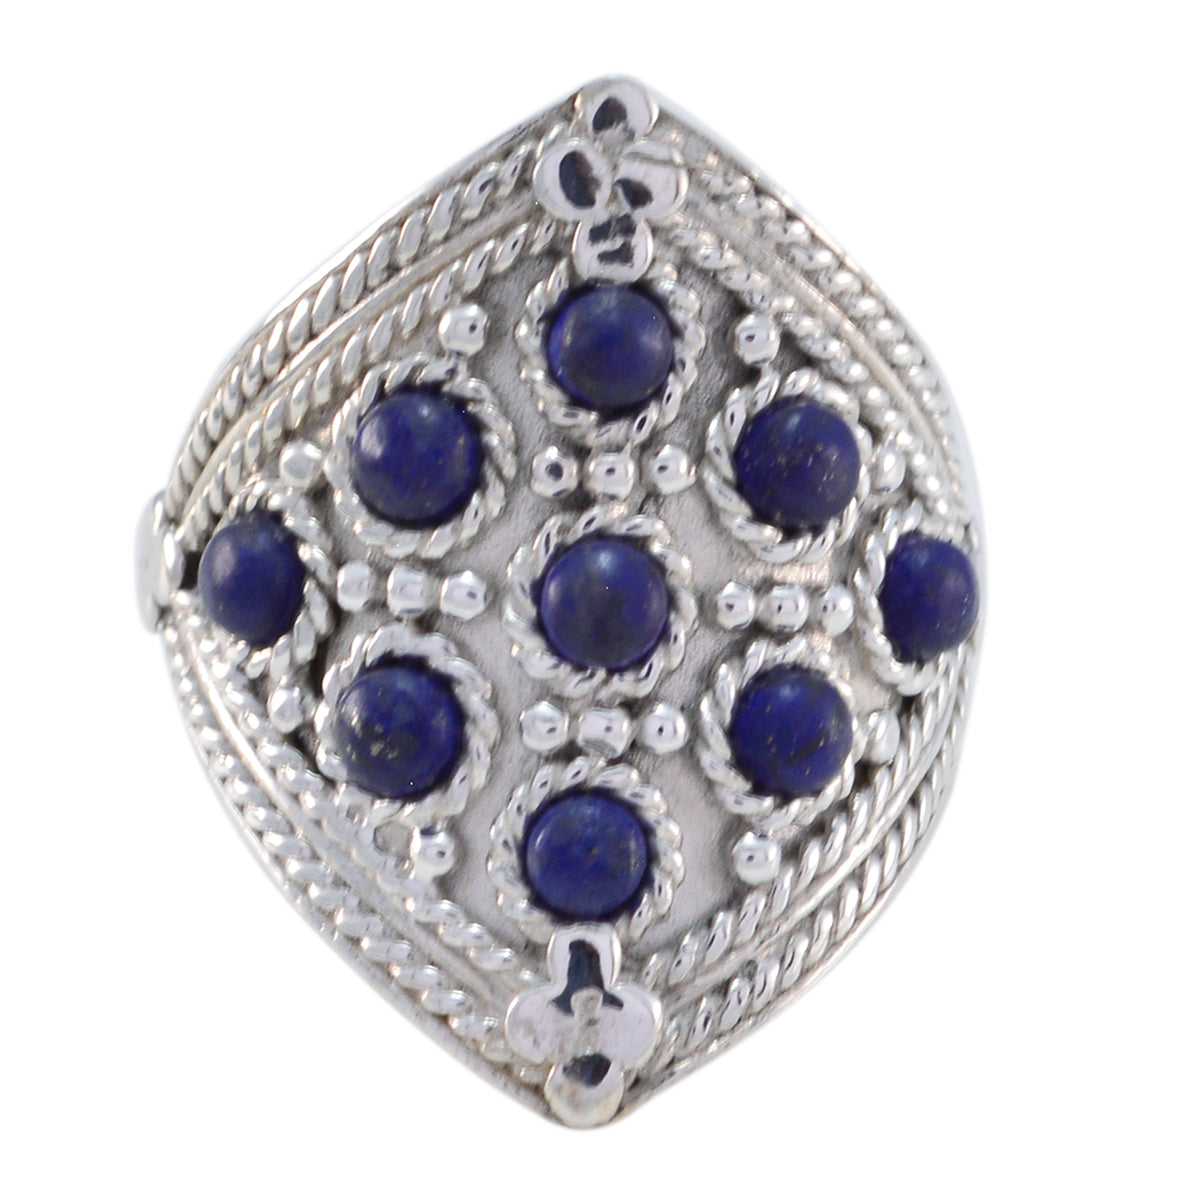 Enticing Gem Lapis Lazuli 925 Silver Ring Stainless Steel Jewelry